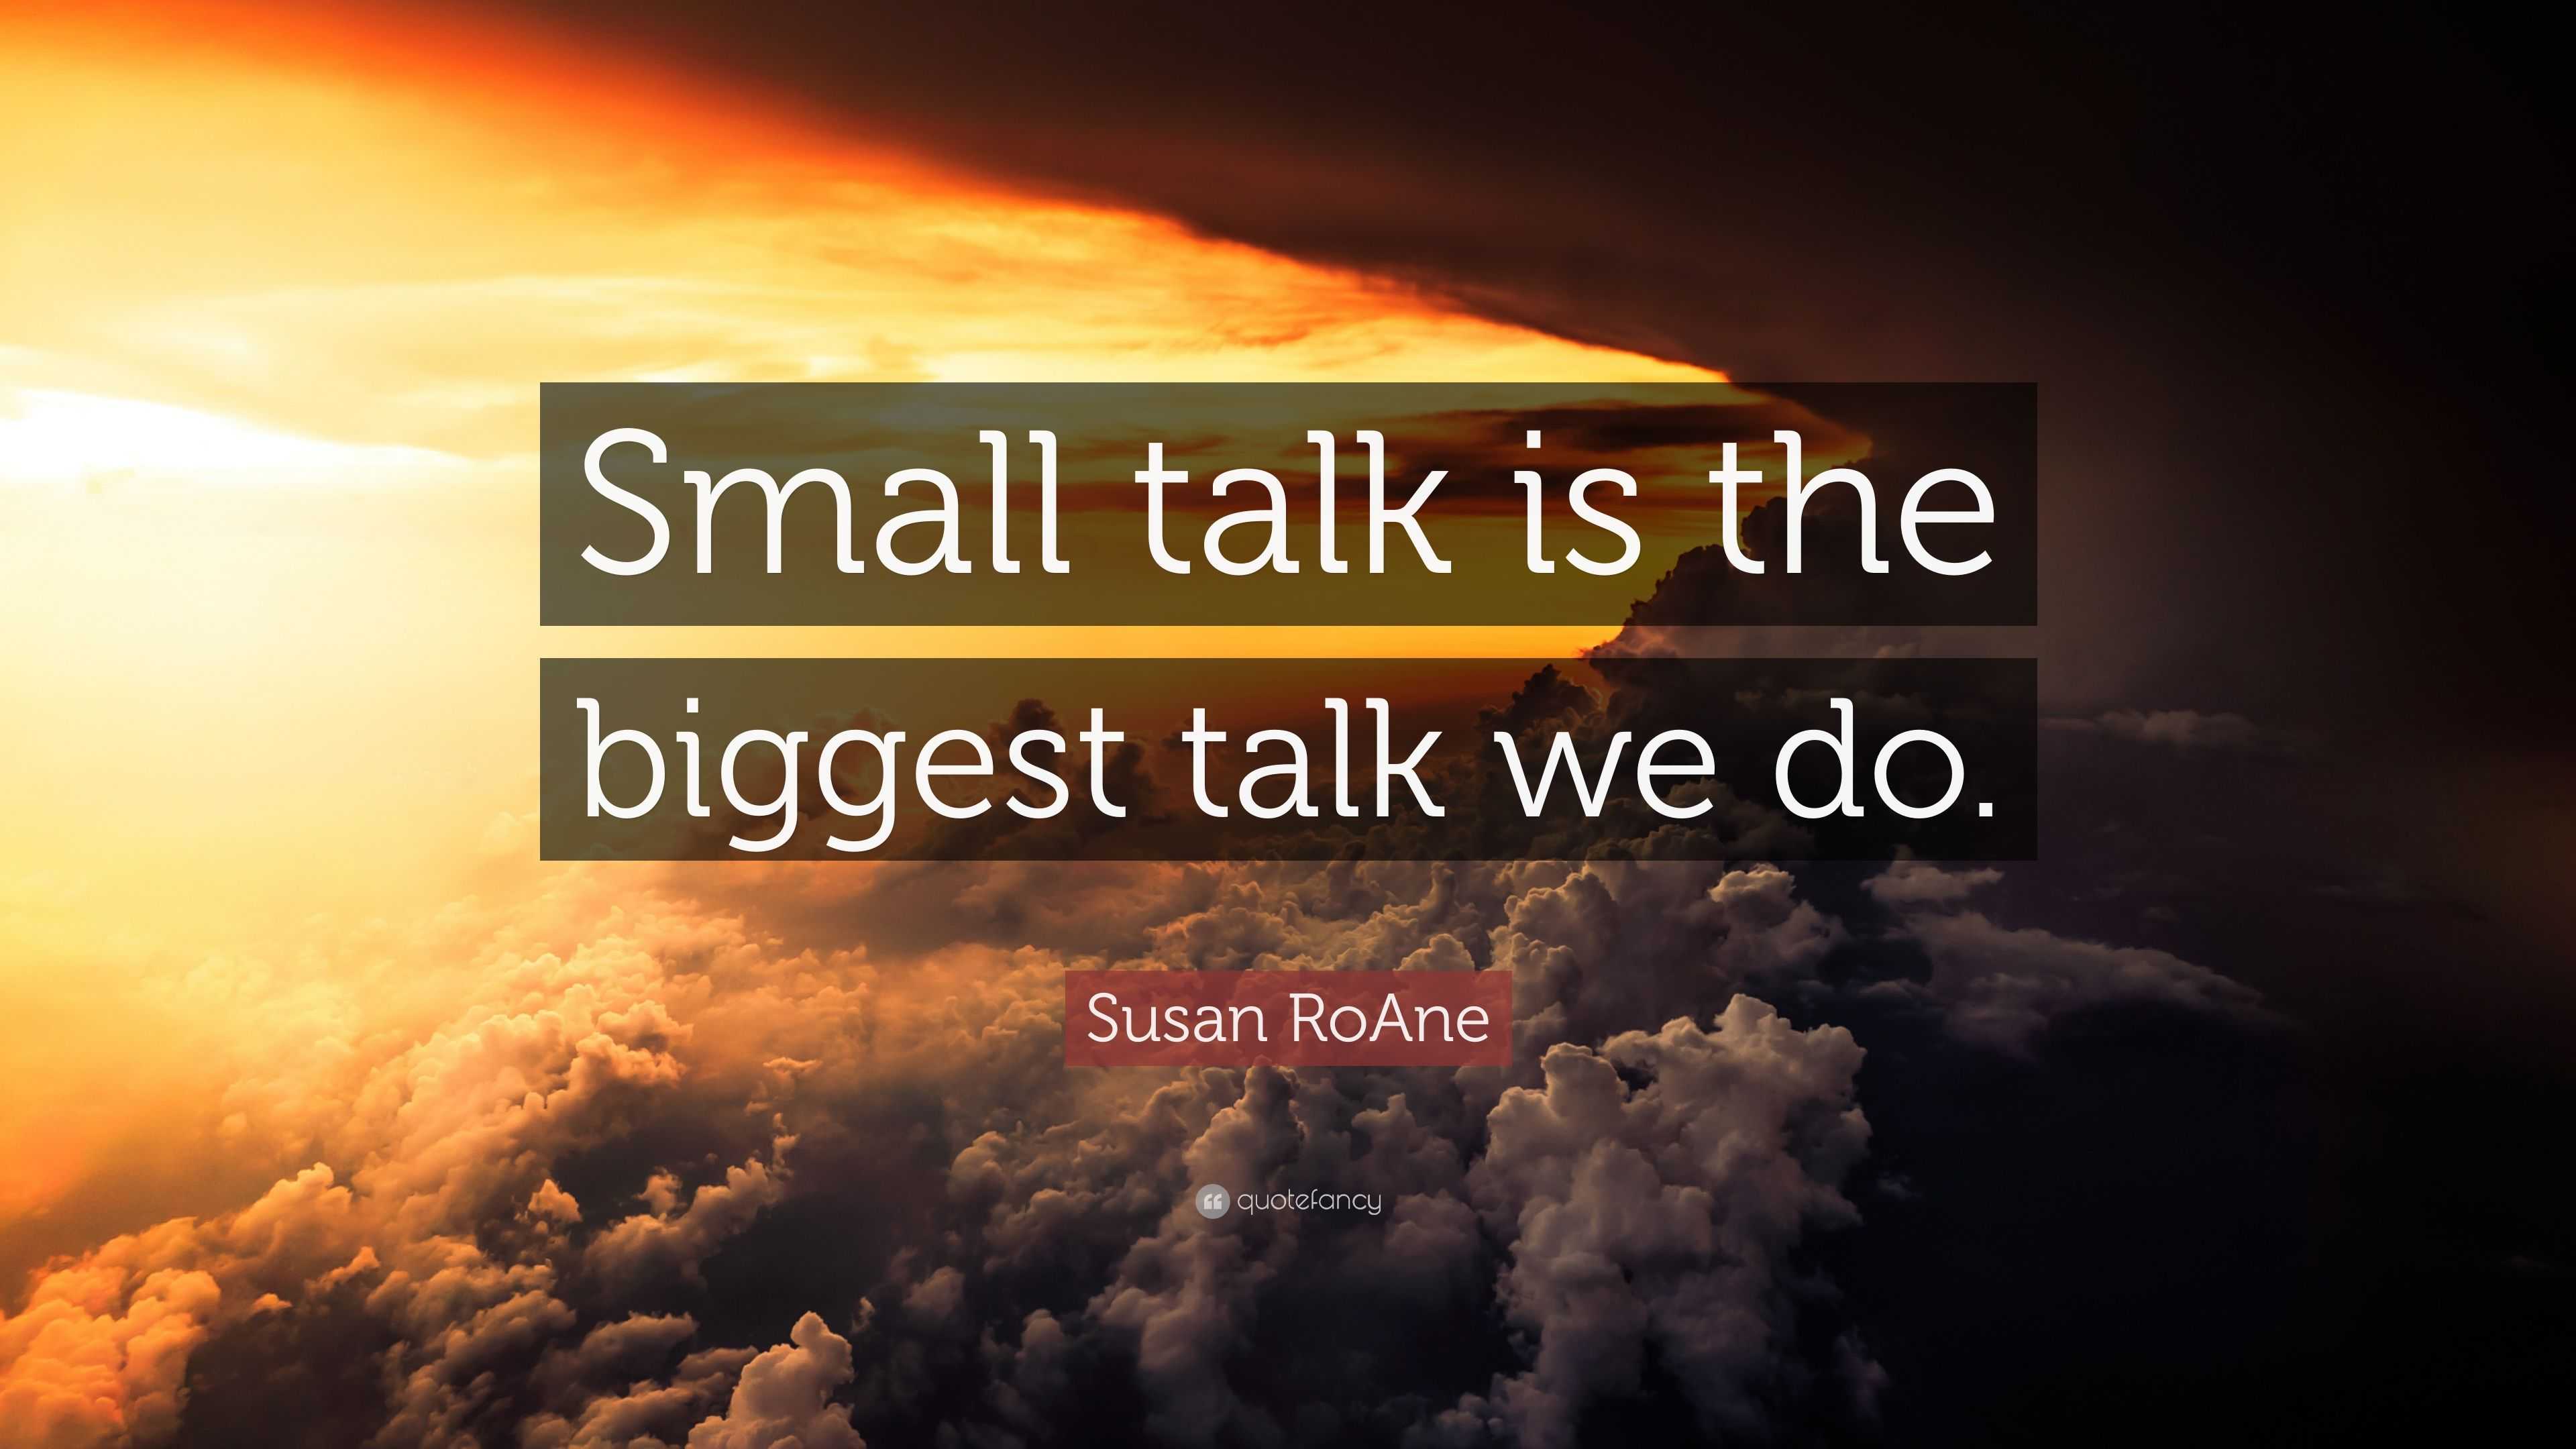 Susan RoAne Quote “Small talk is the biggest talk we do